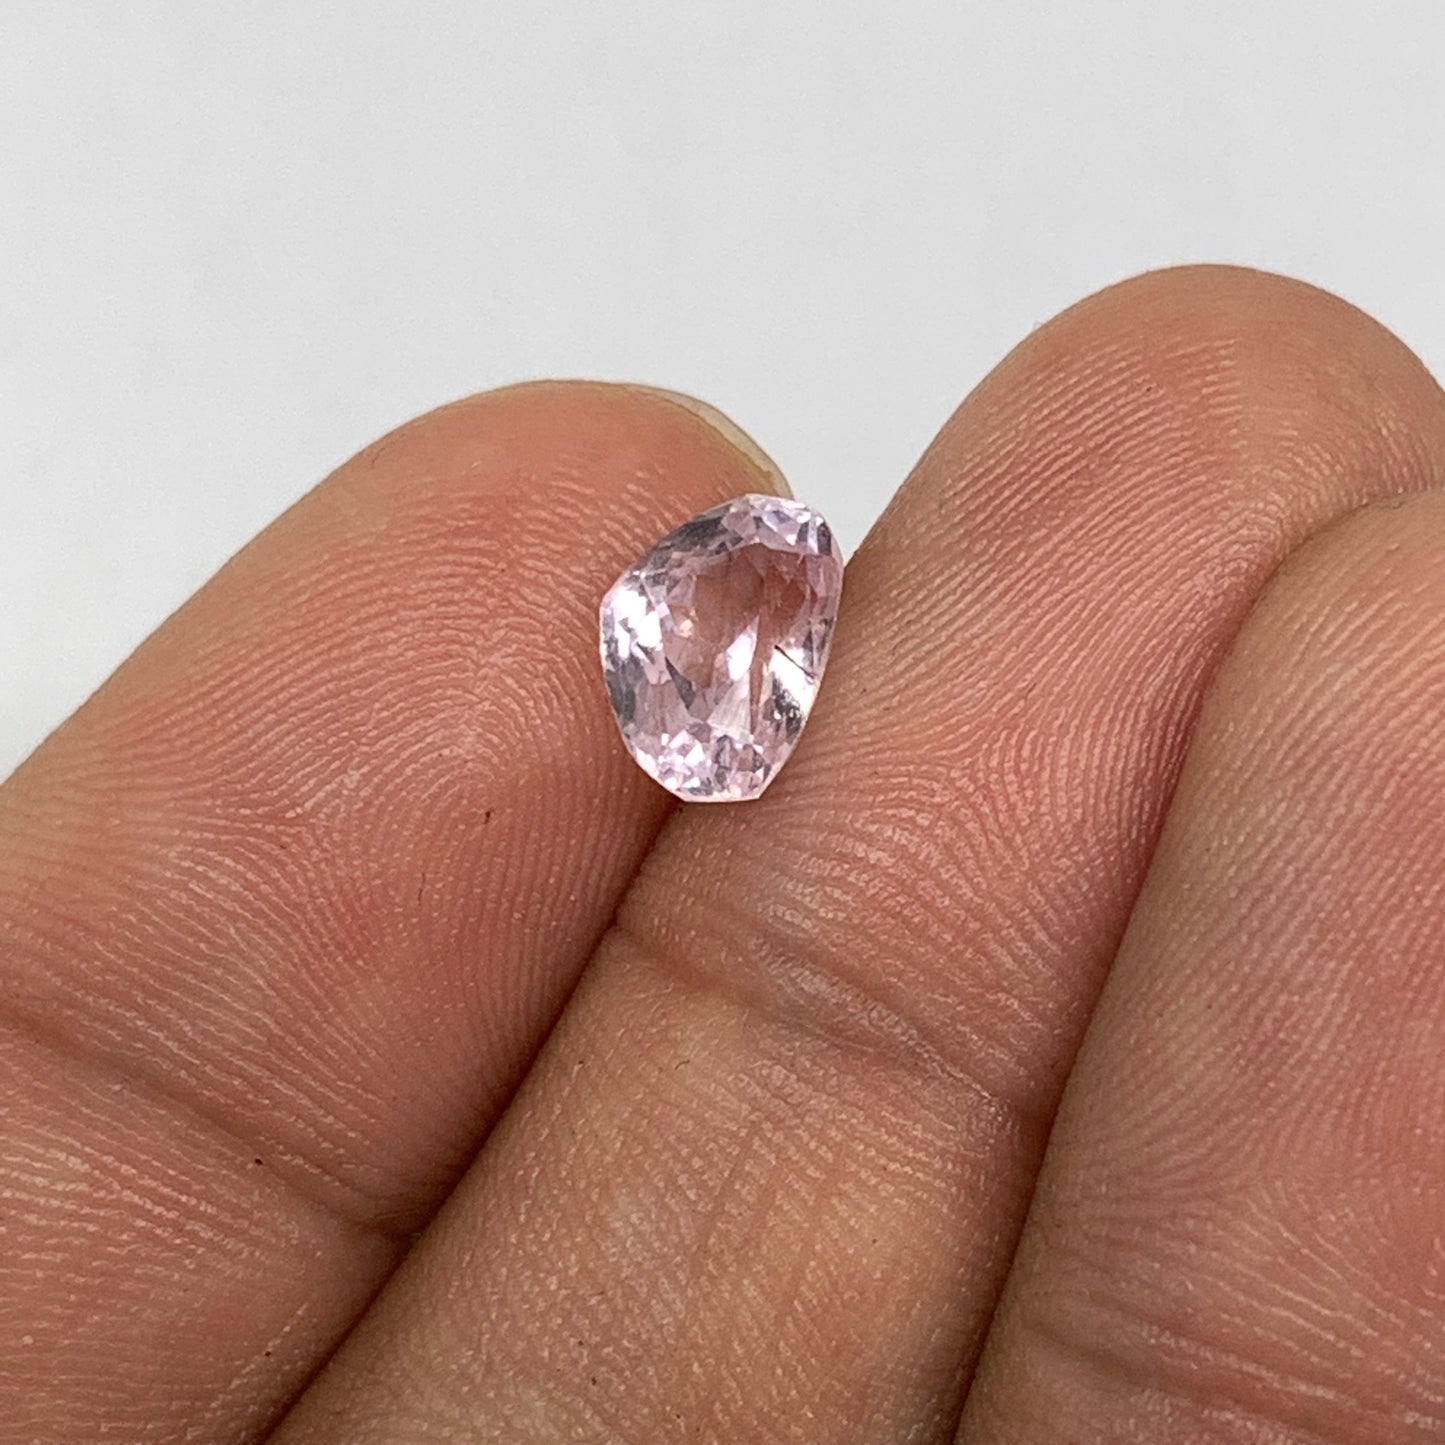 1.96cts, 8mmx5mmx5mm, Kunzite Crystal Facetted Cut Stone @Afghanistan, CTS07